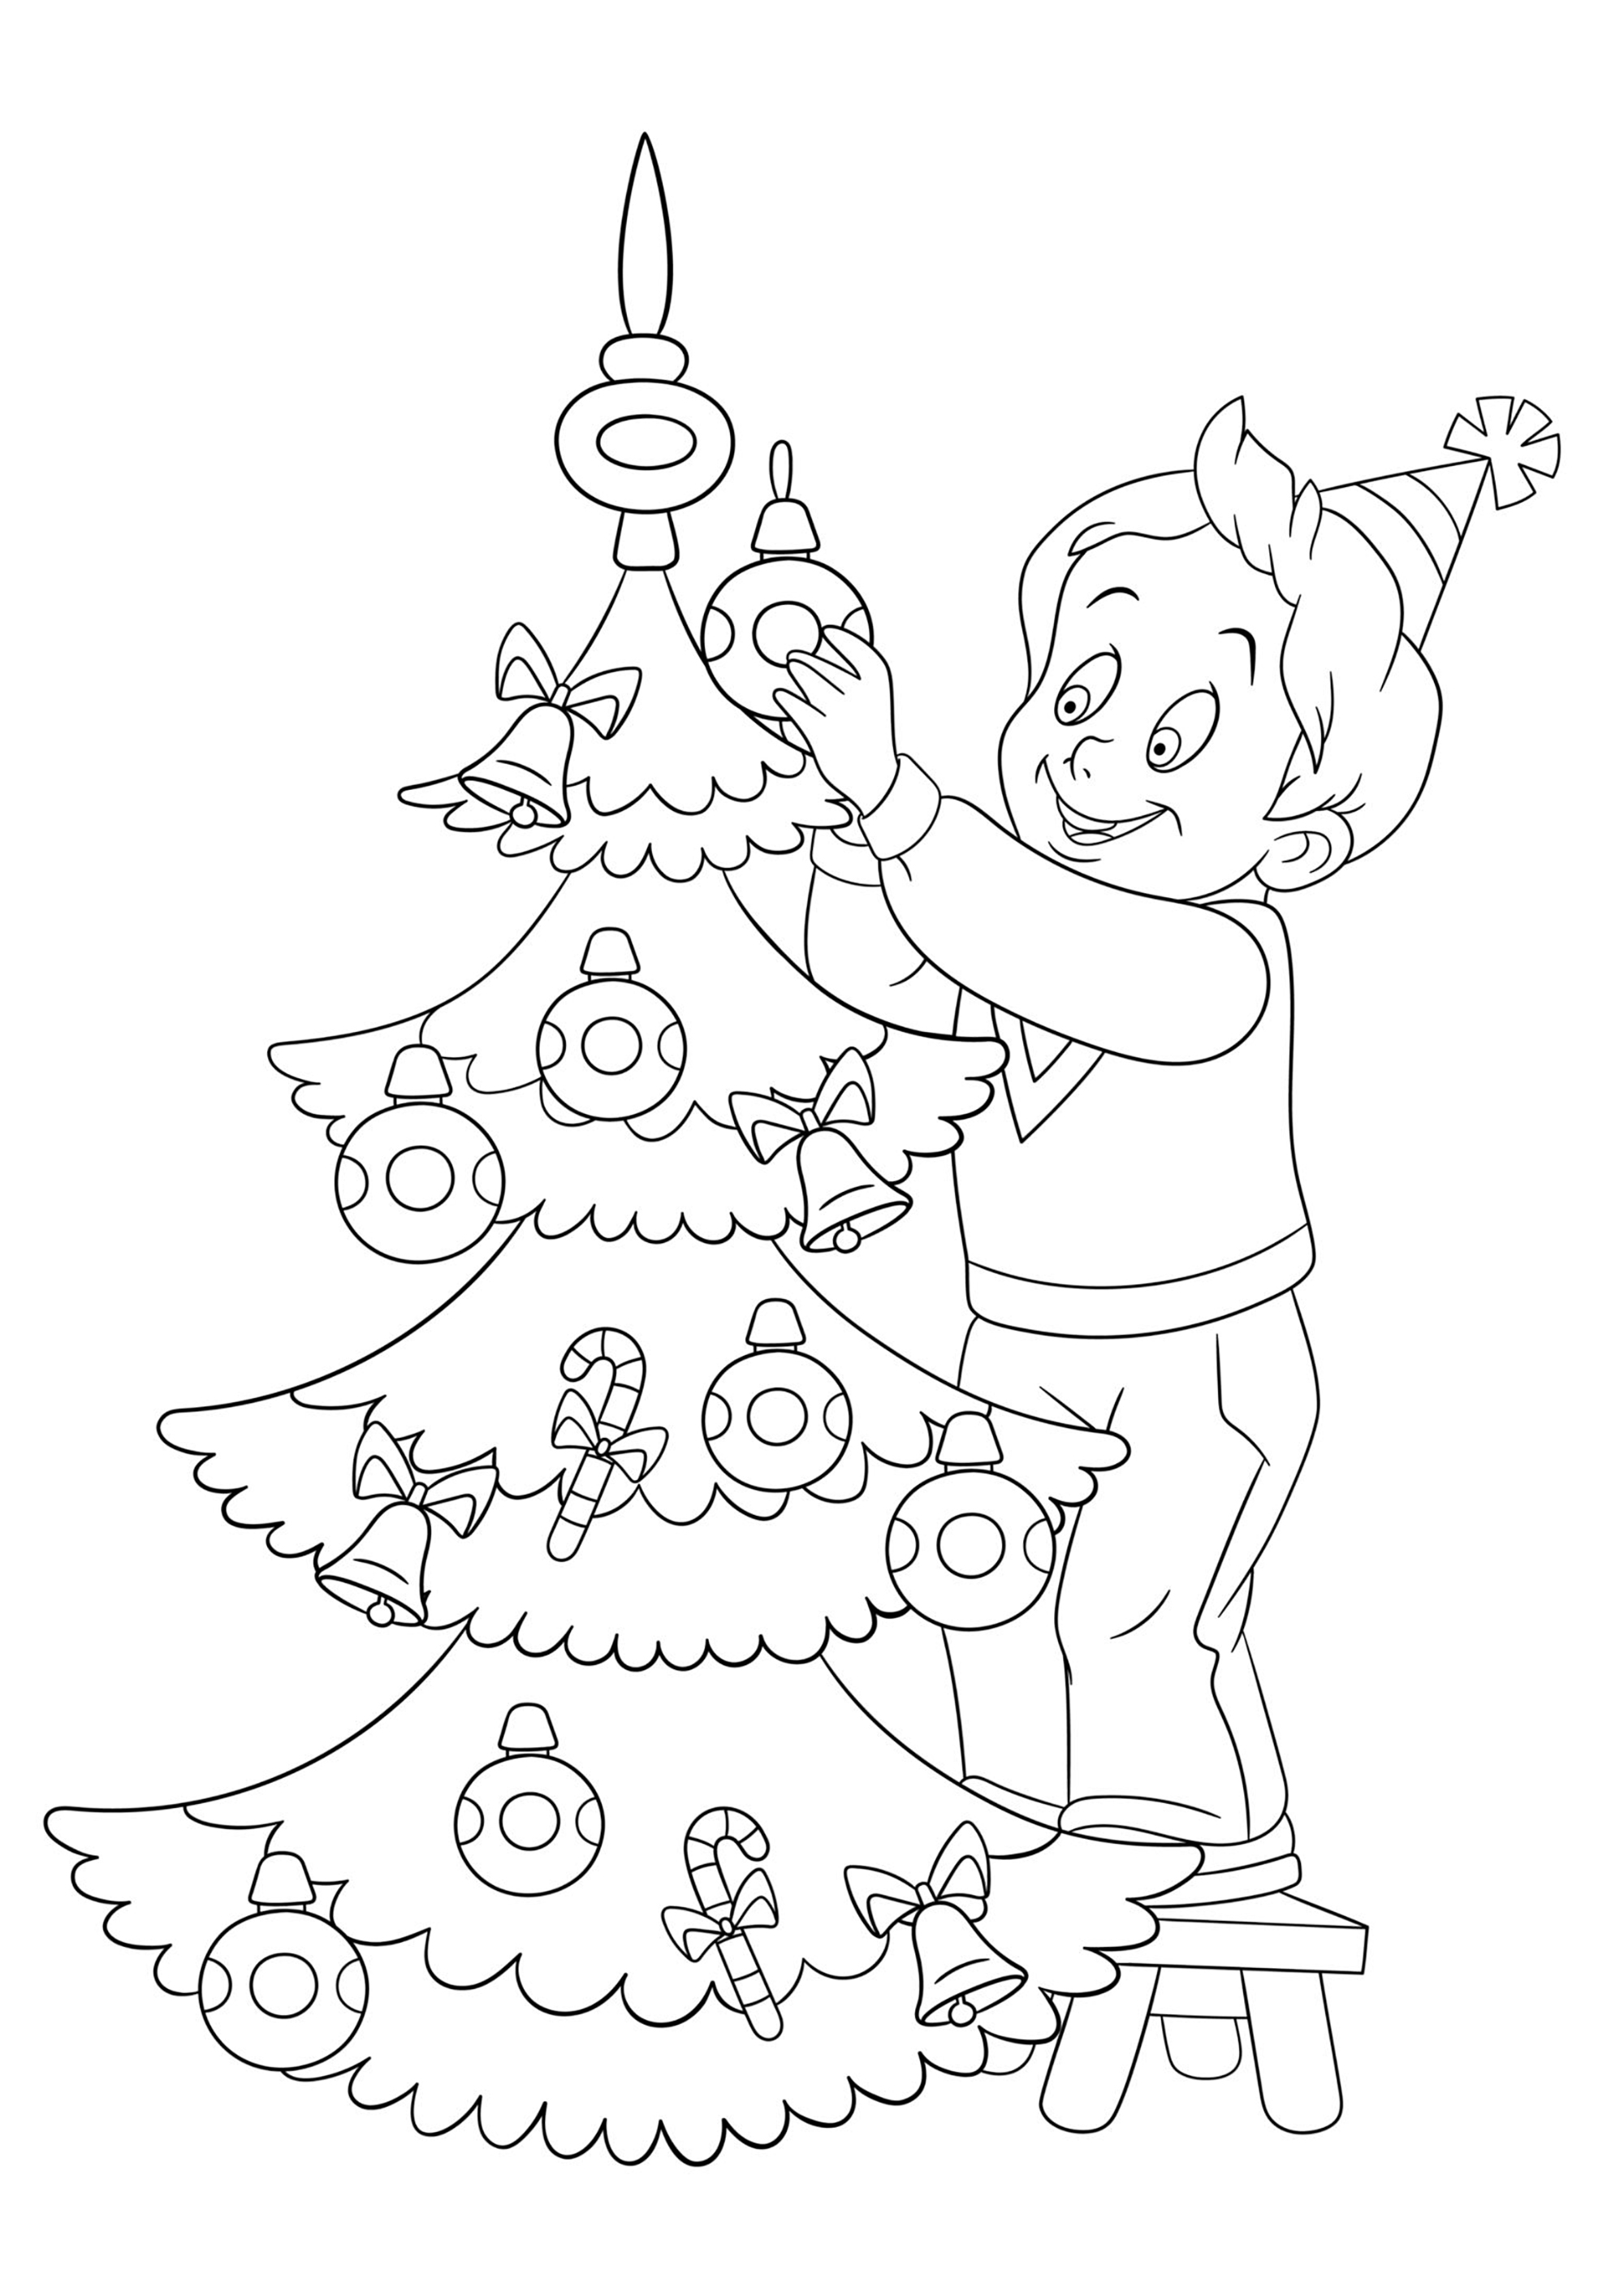 A beautiful Christmas tree decorated by a young boy, Artist : Sybirko